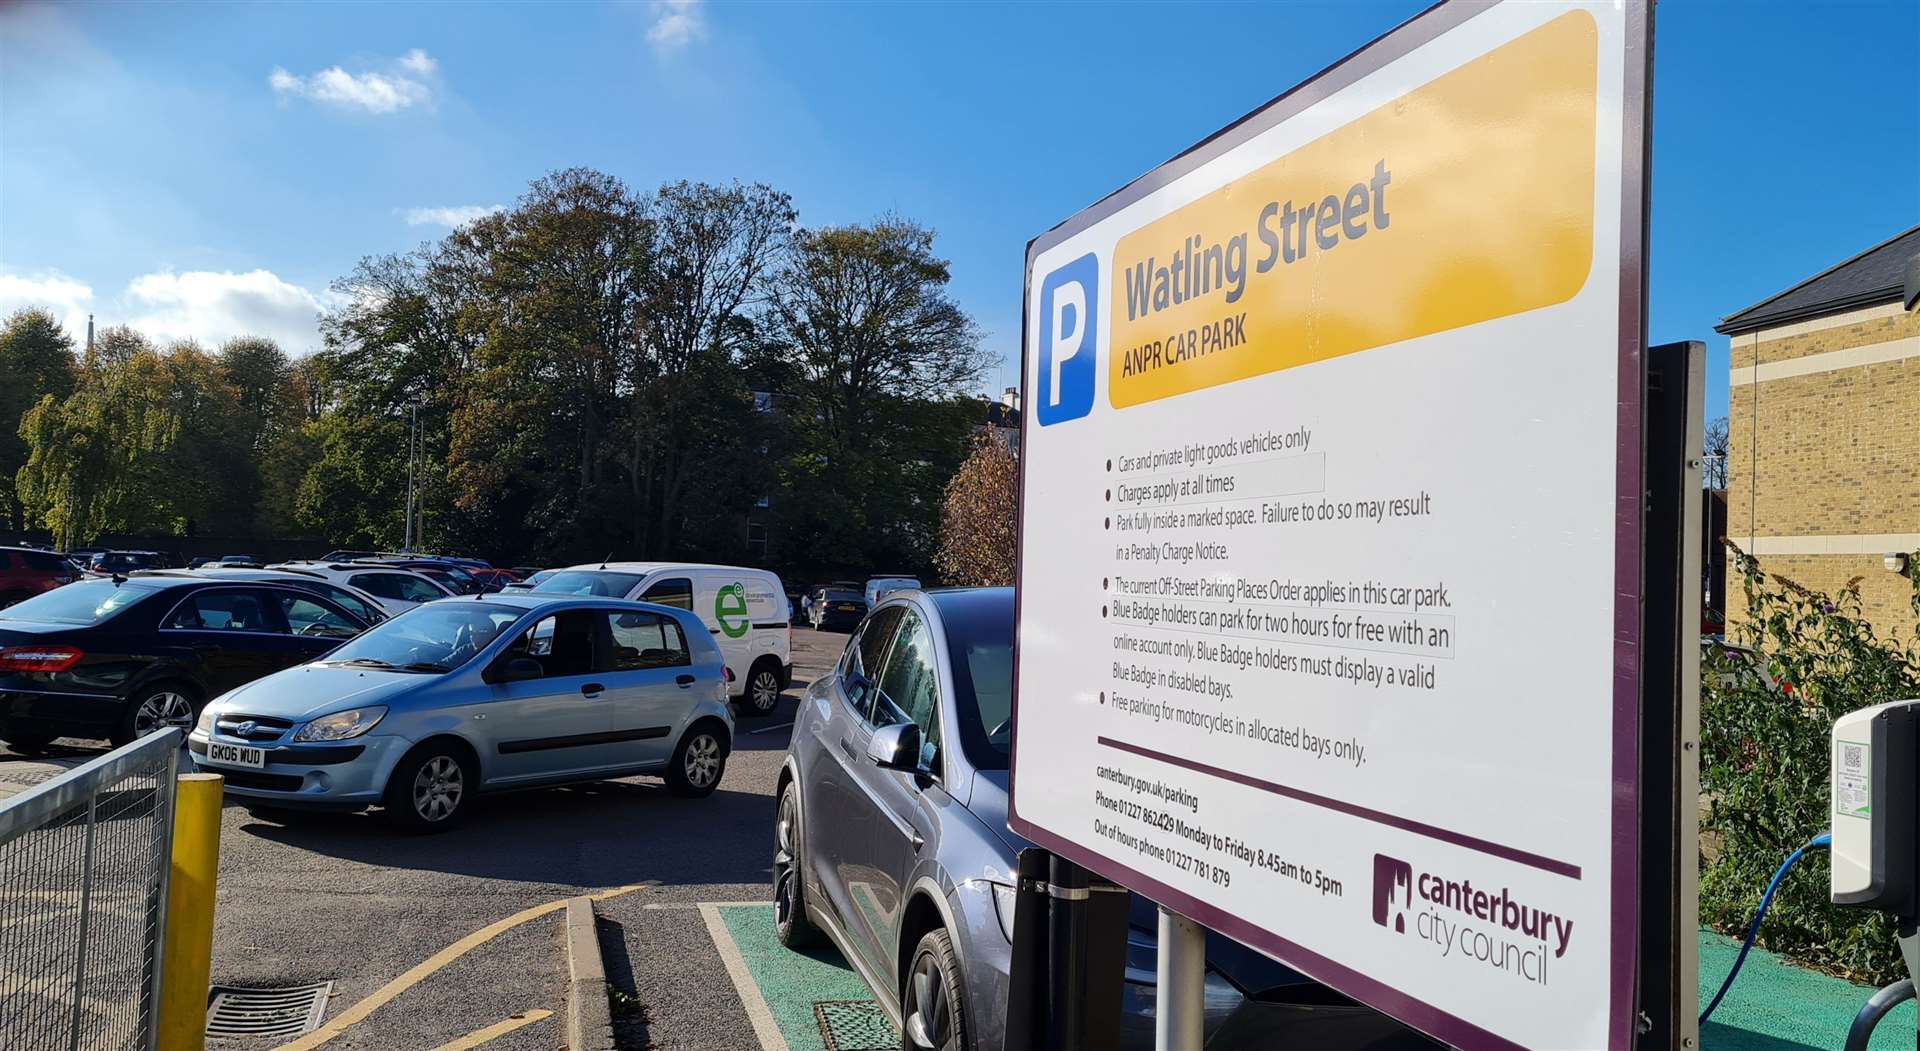 Watling Street car park is the most expensive car park in the city, along with Queningate